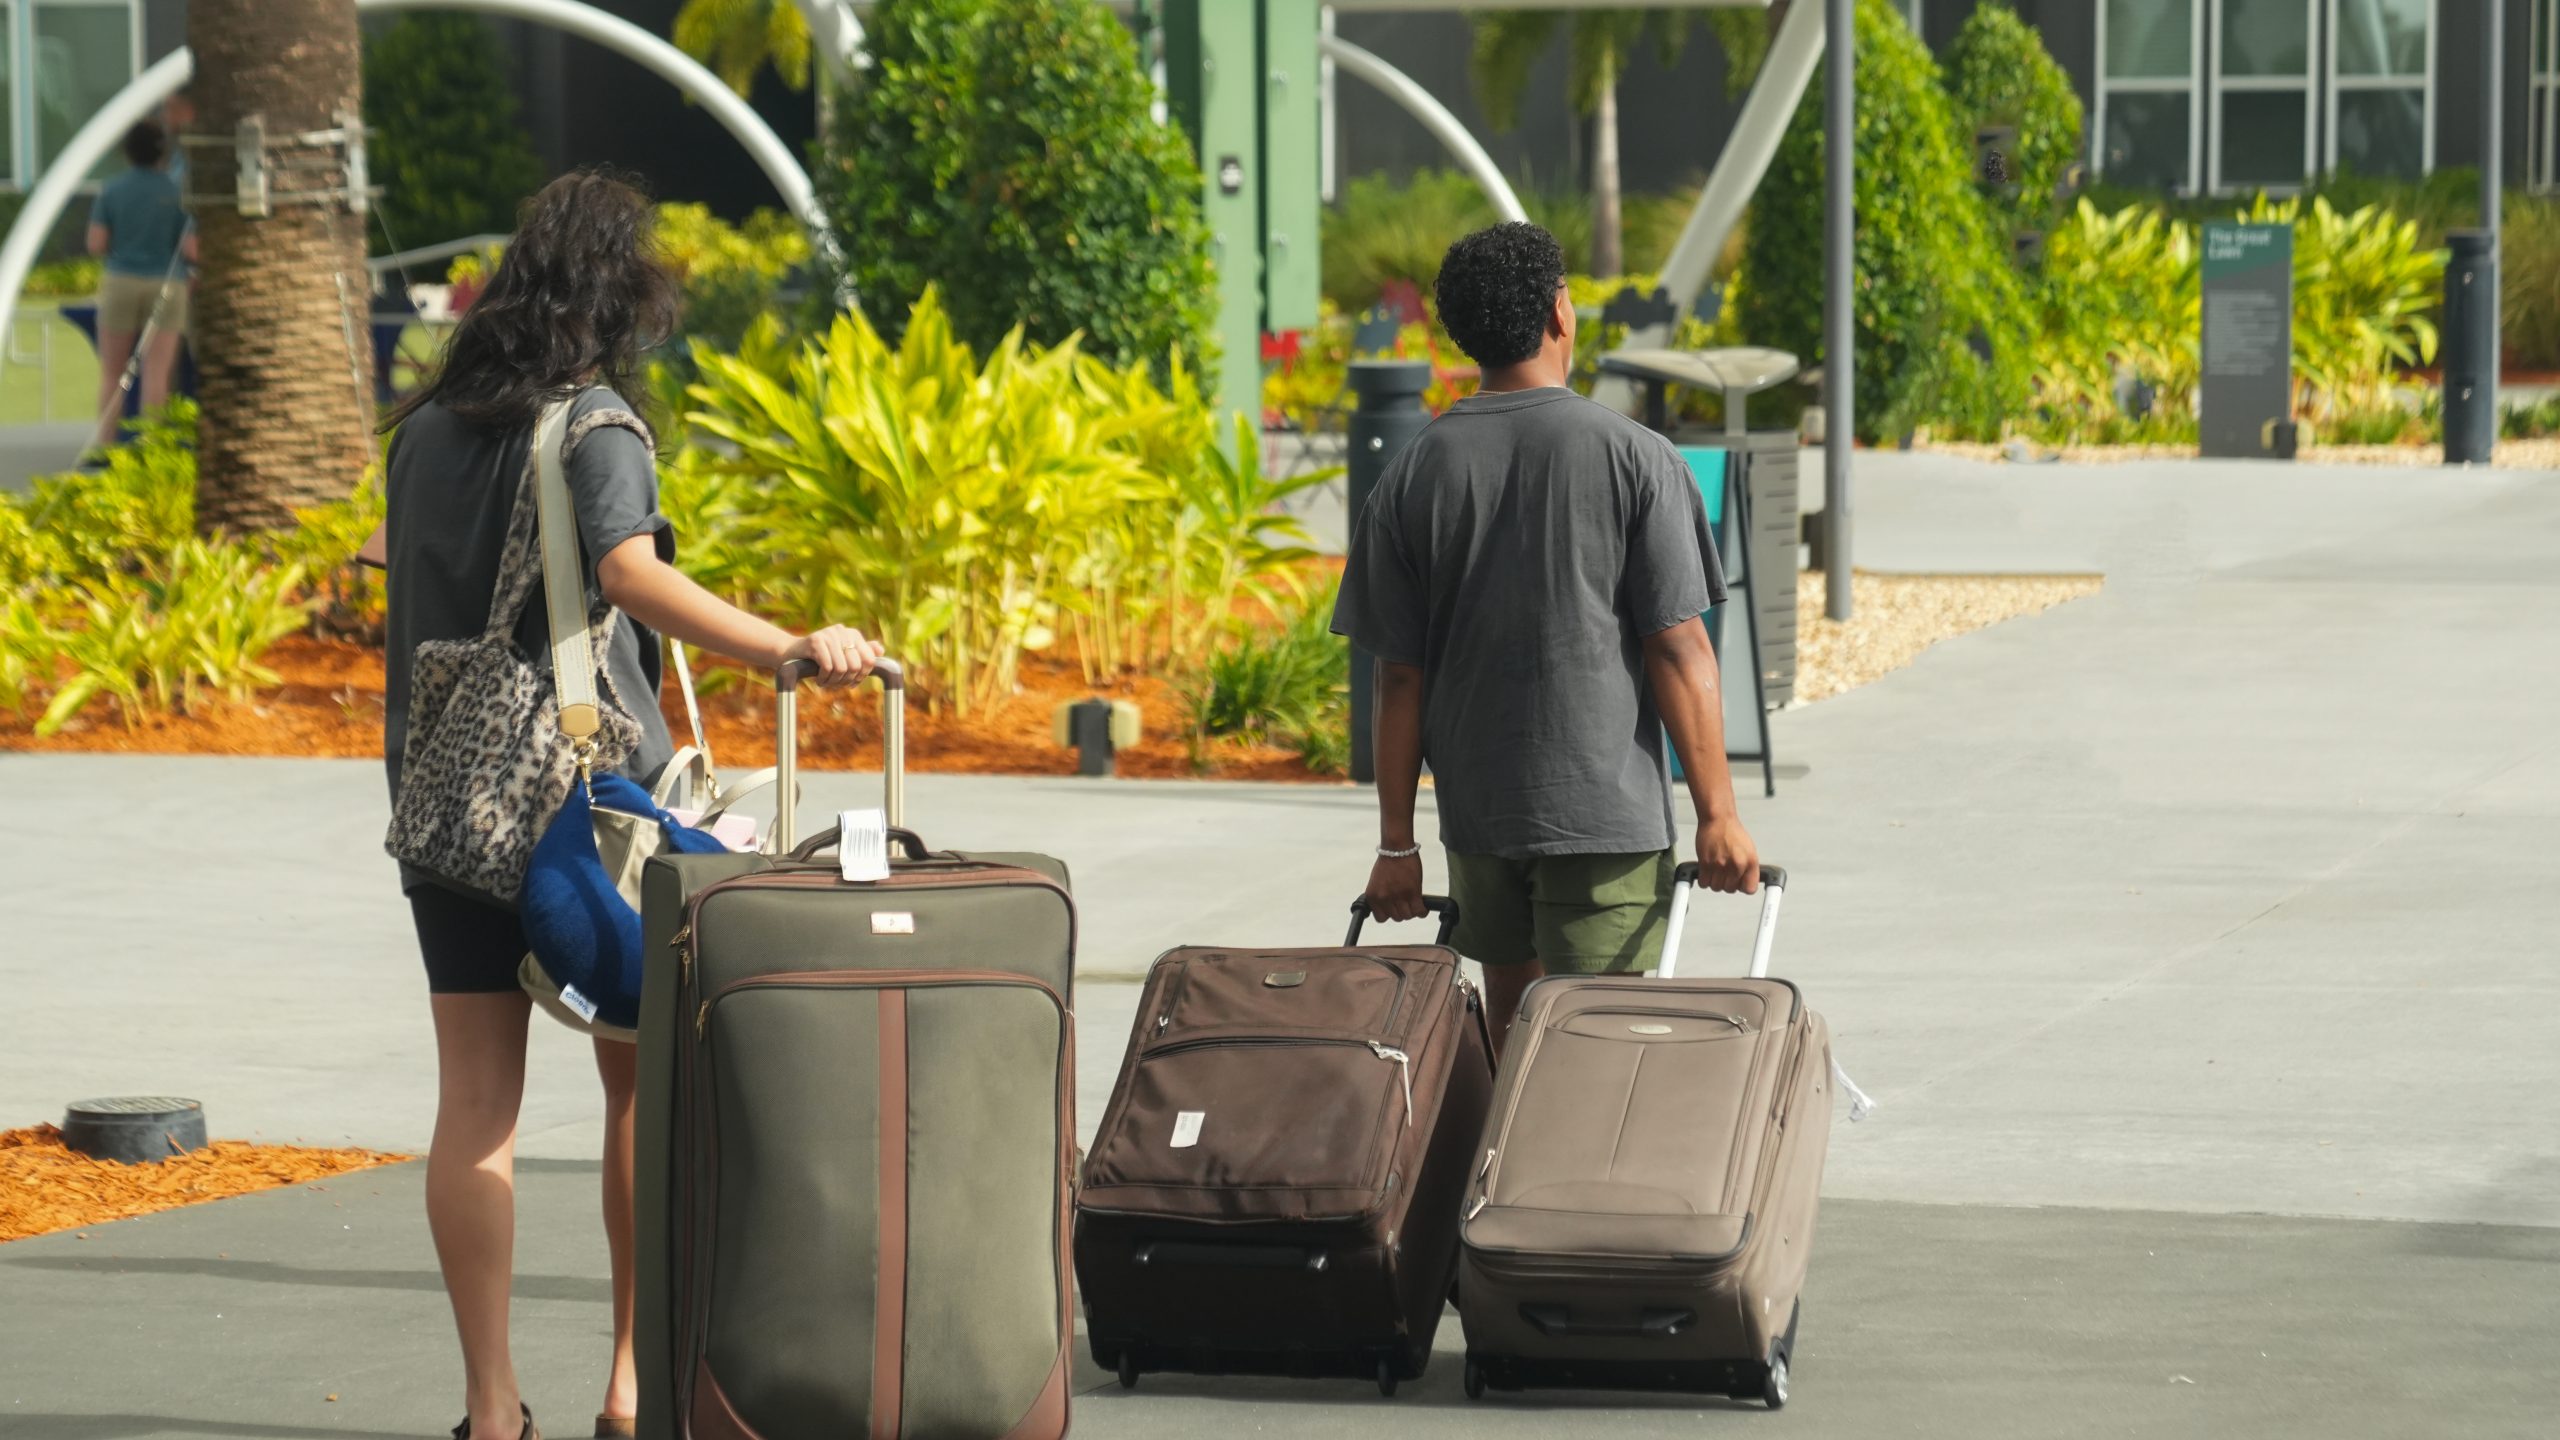 Two people walking away from the camera and carrying suitcases